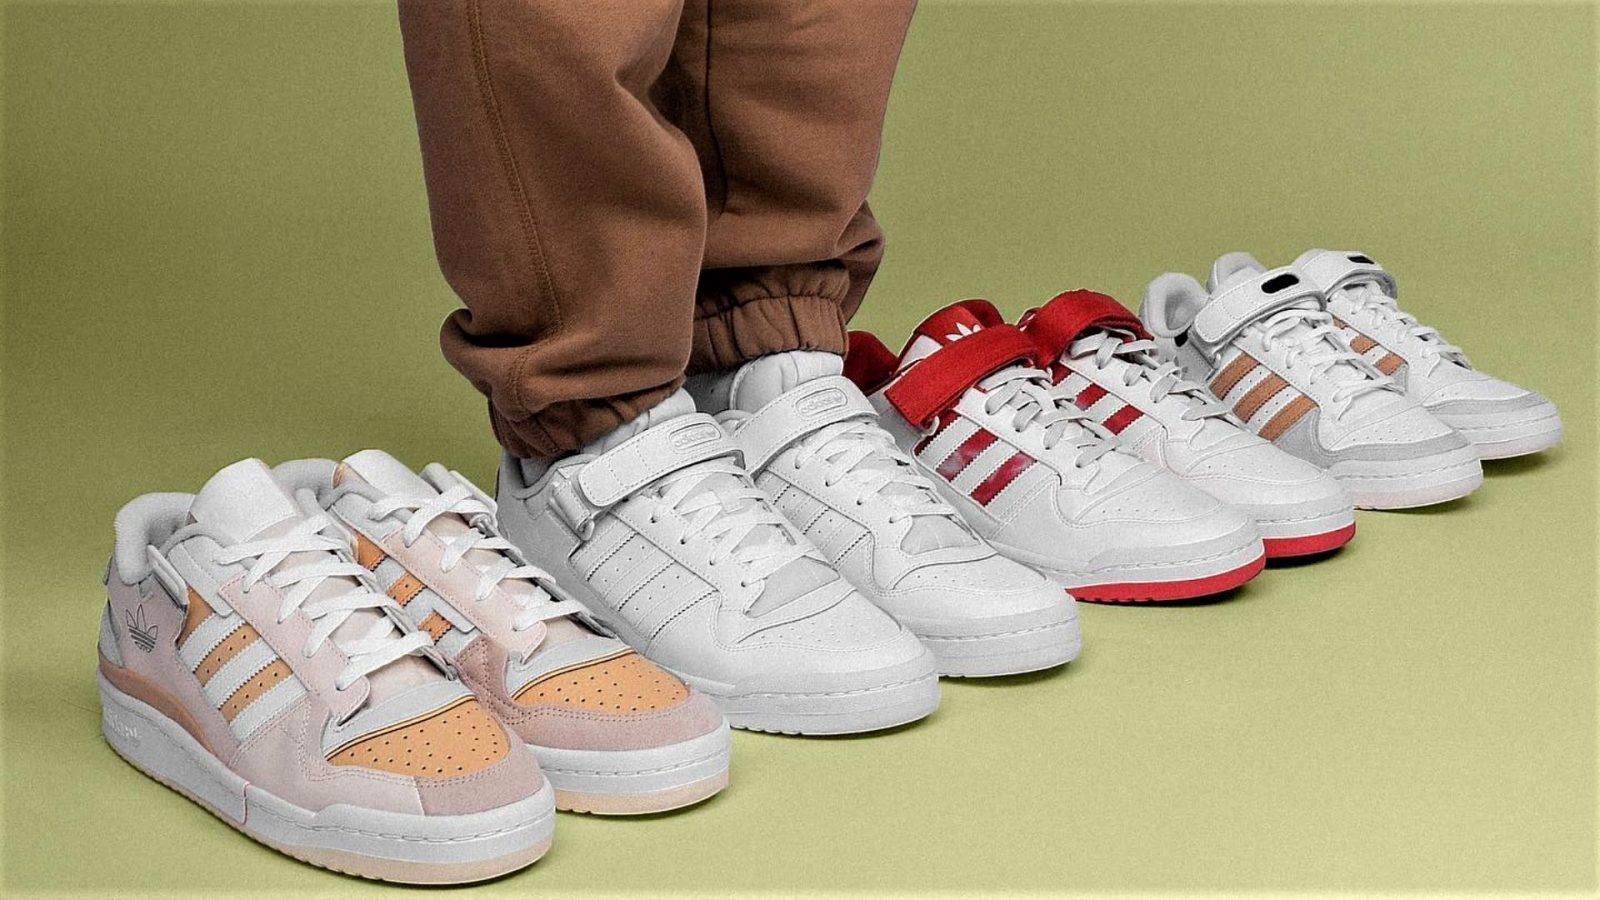 classic Adidas sneakers for men will go out of